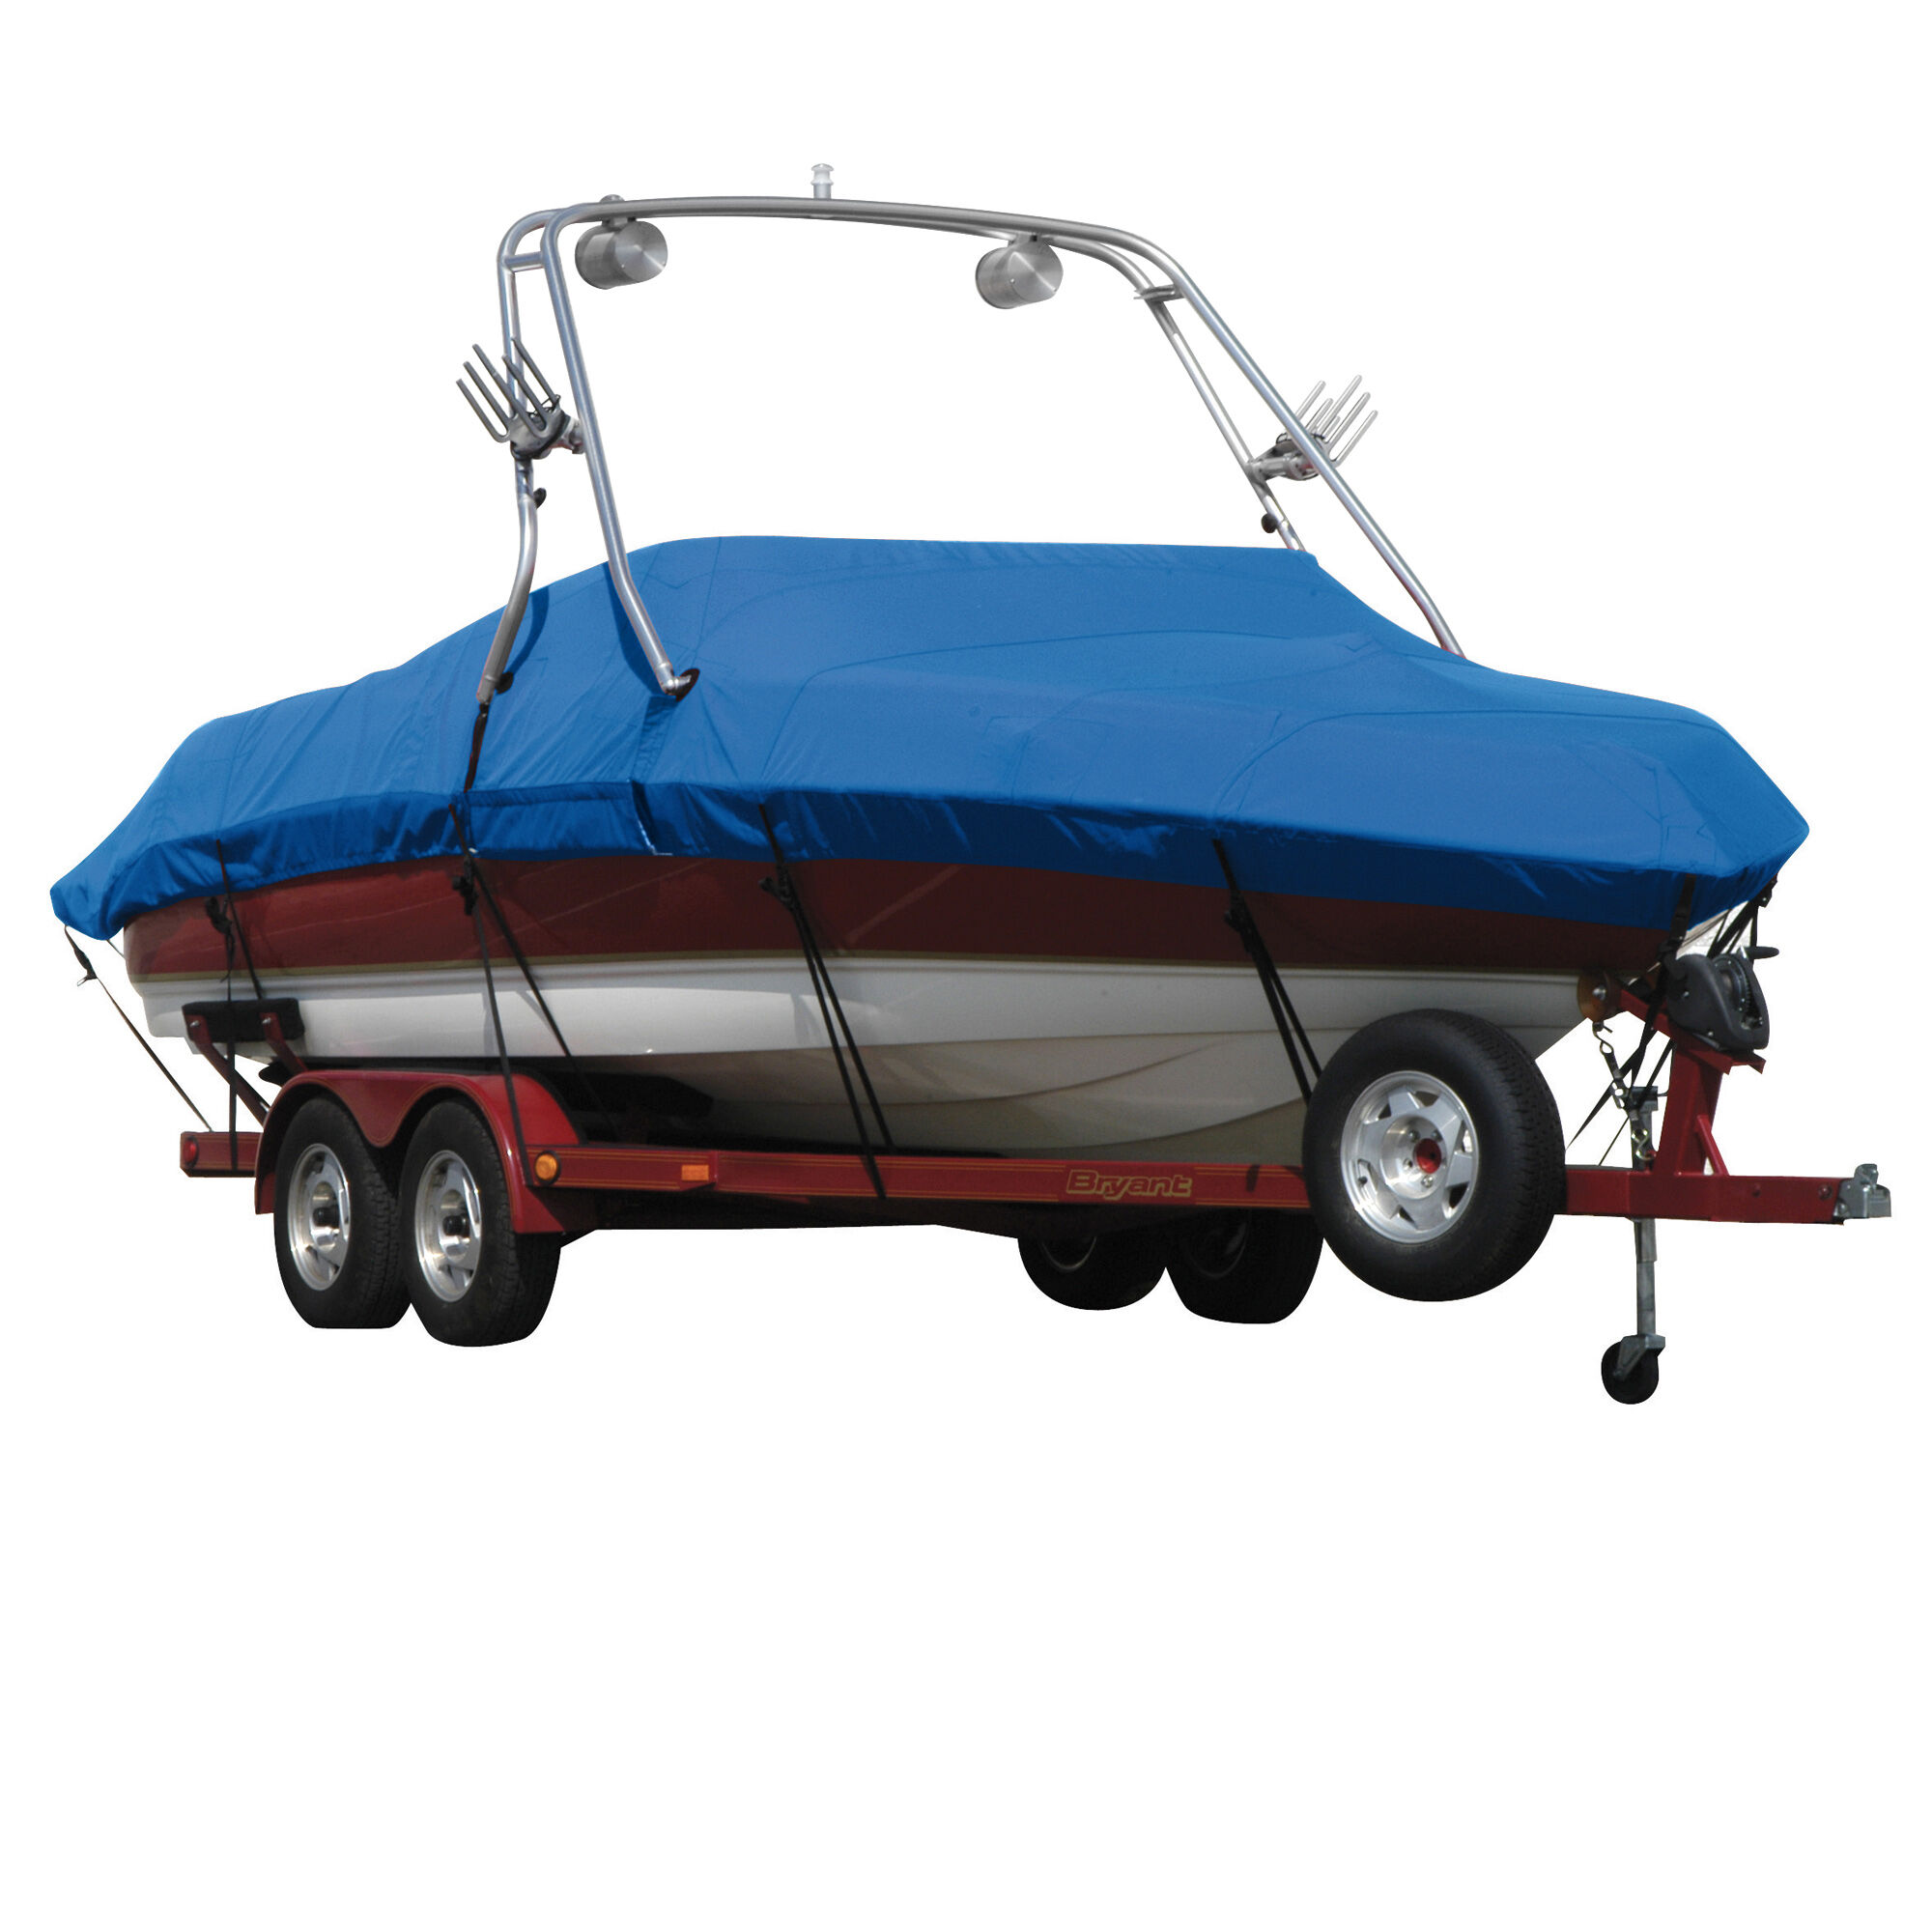 Covermate MASTERCRAFT X 45 XTREME TOWER DOES NOT Boat Cover in Pacific Blue